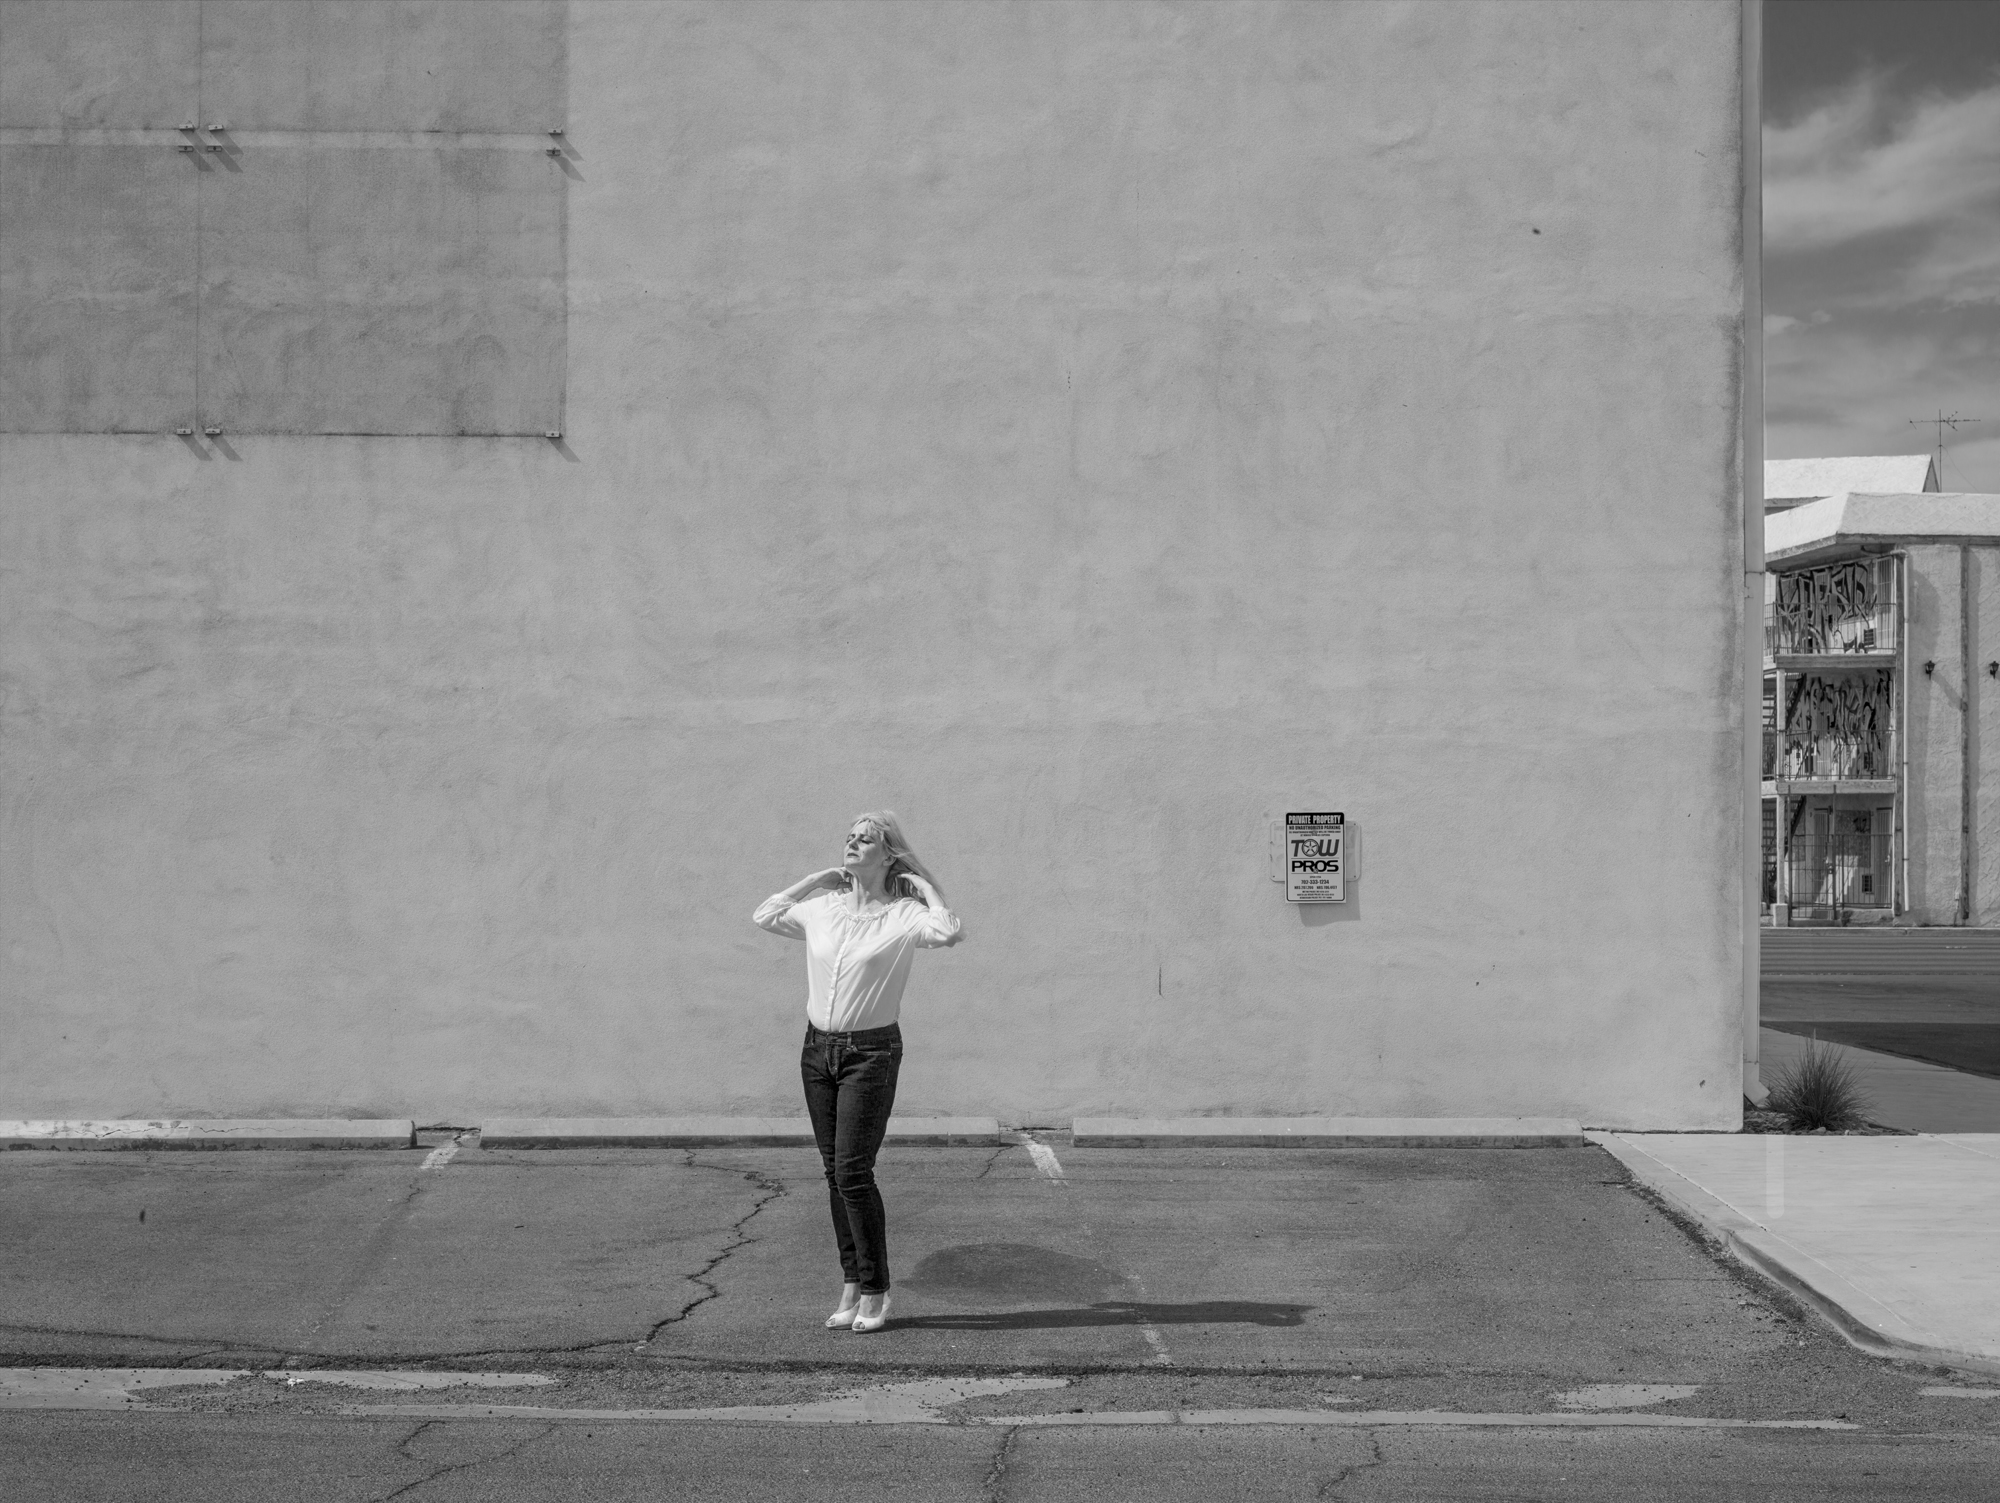 Black and white photograph of figure posing in an empty parking lot